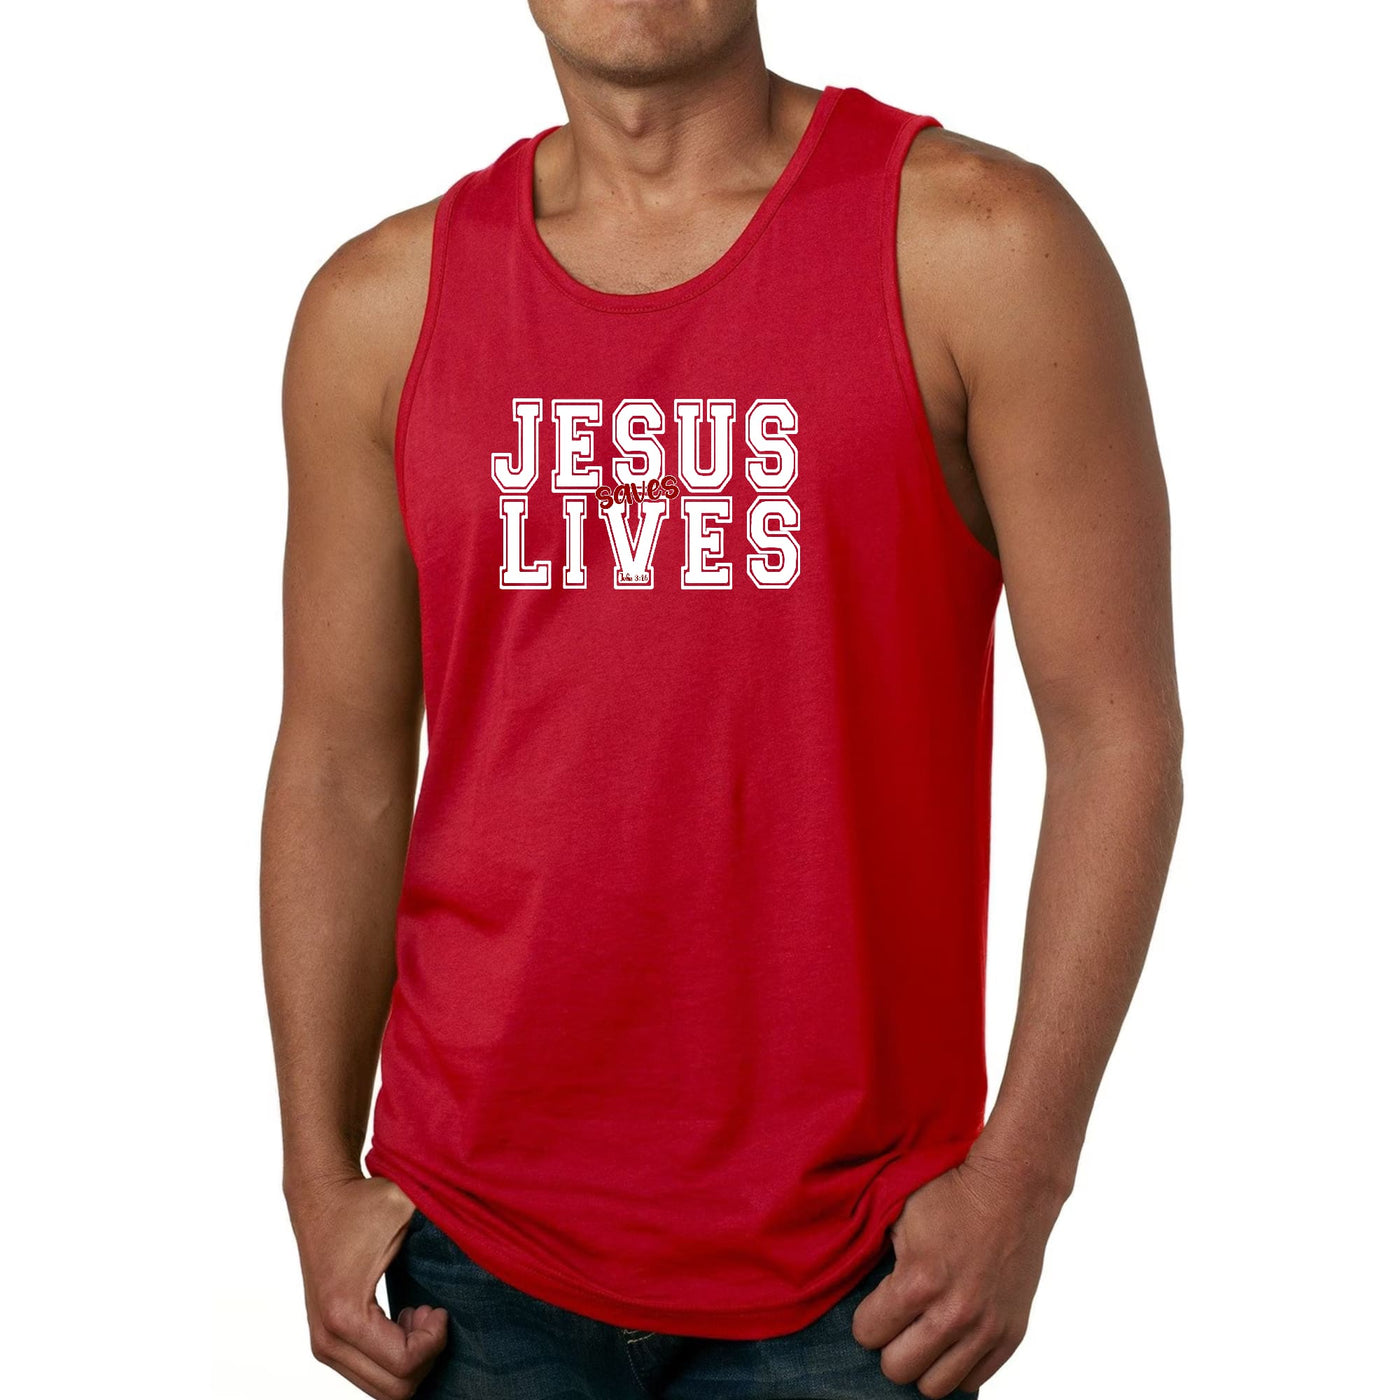 Mens Tank Top Fitness T - shirt Jesus Saves Lives White Red Illustration - Tops